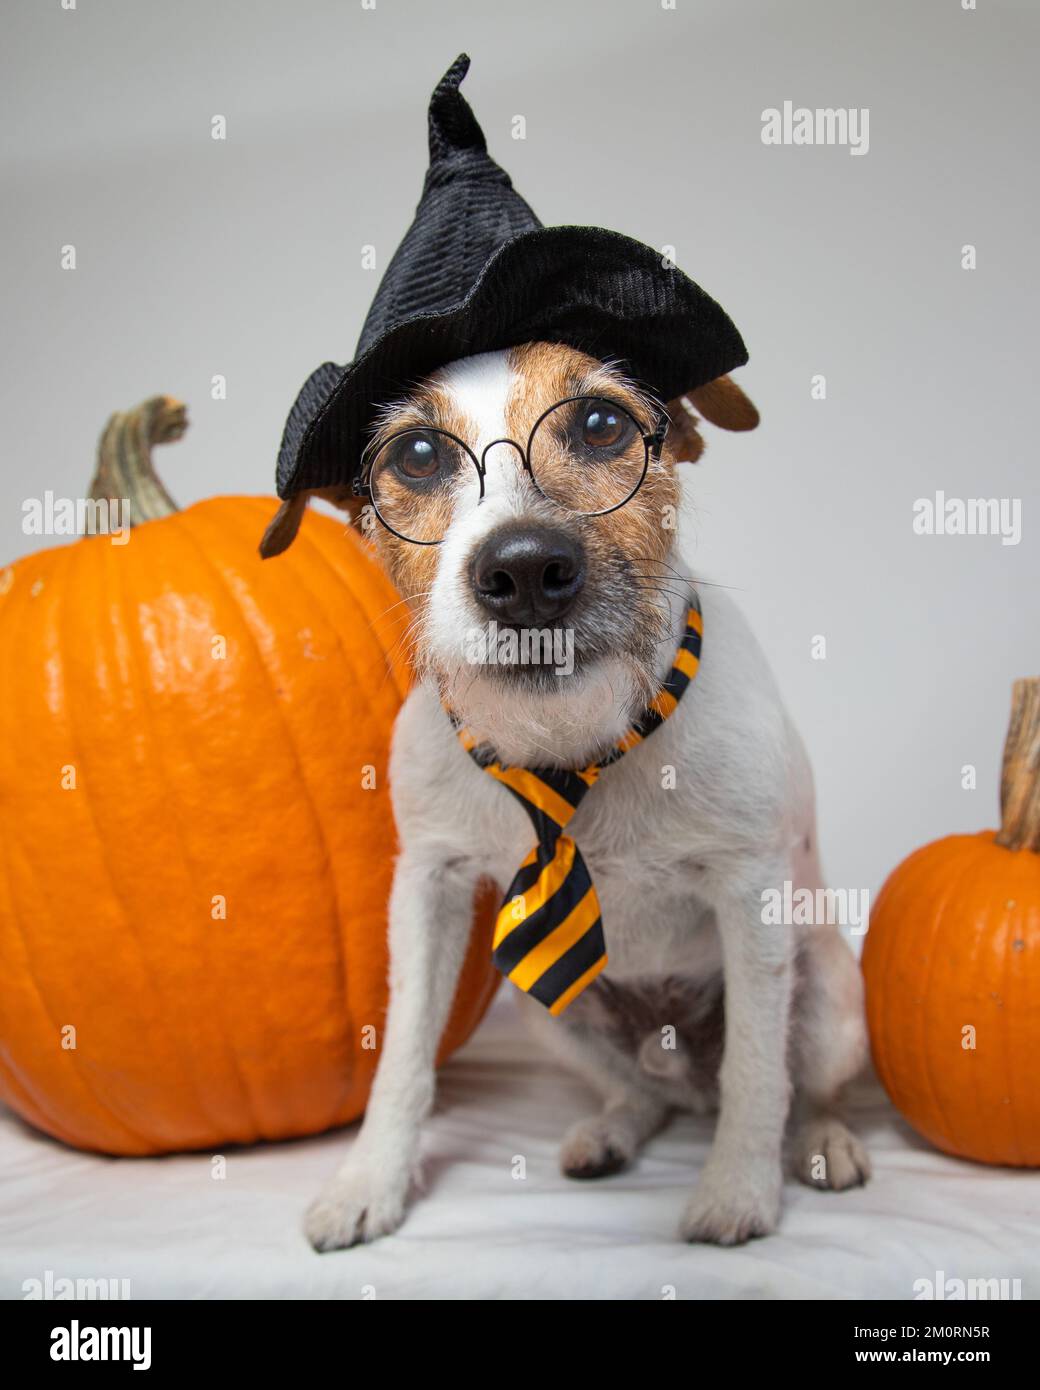 Jack russell terrier dog dressed as Harry Potter sitting amongst pumpkins Stock Photo